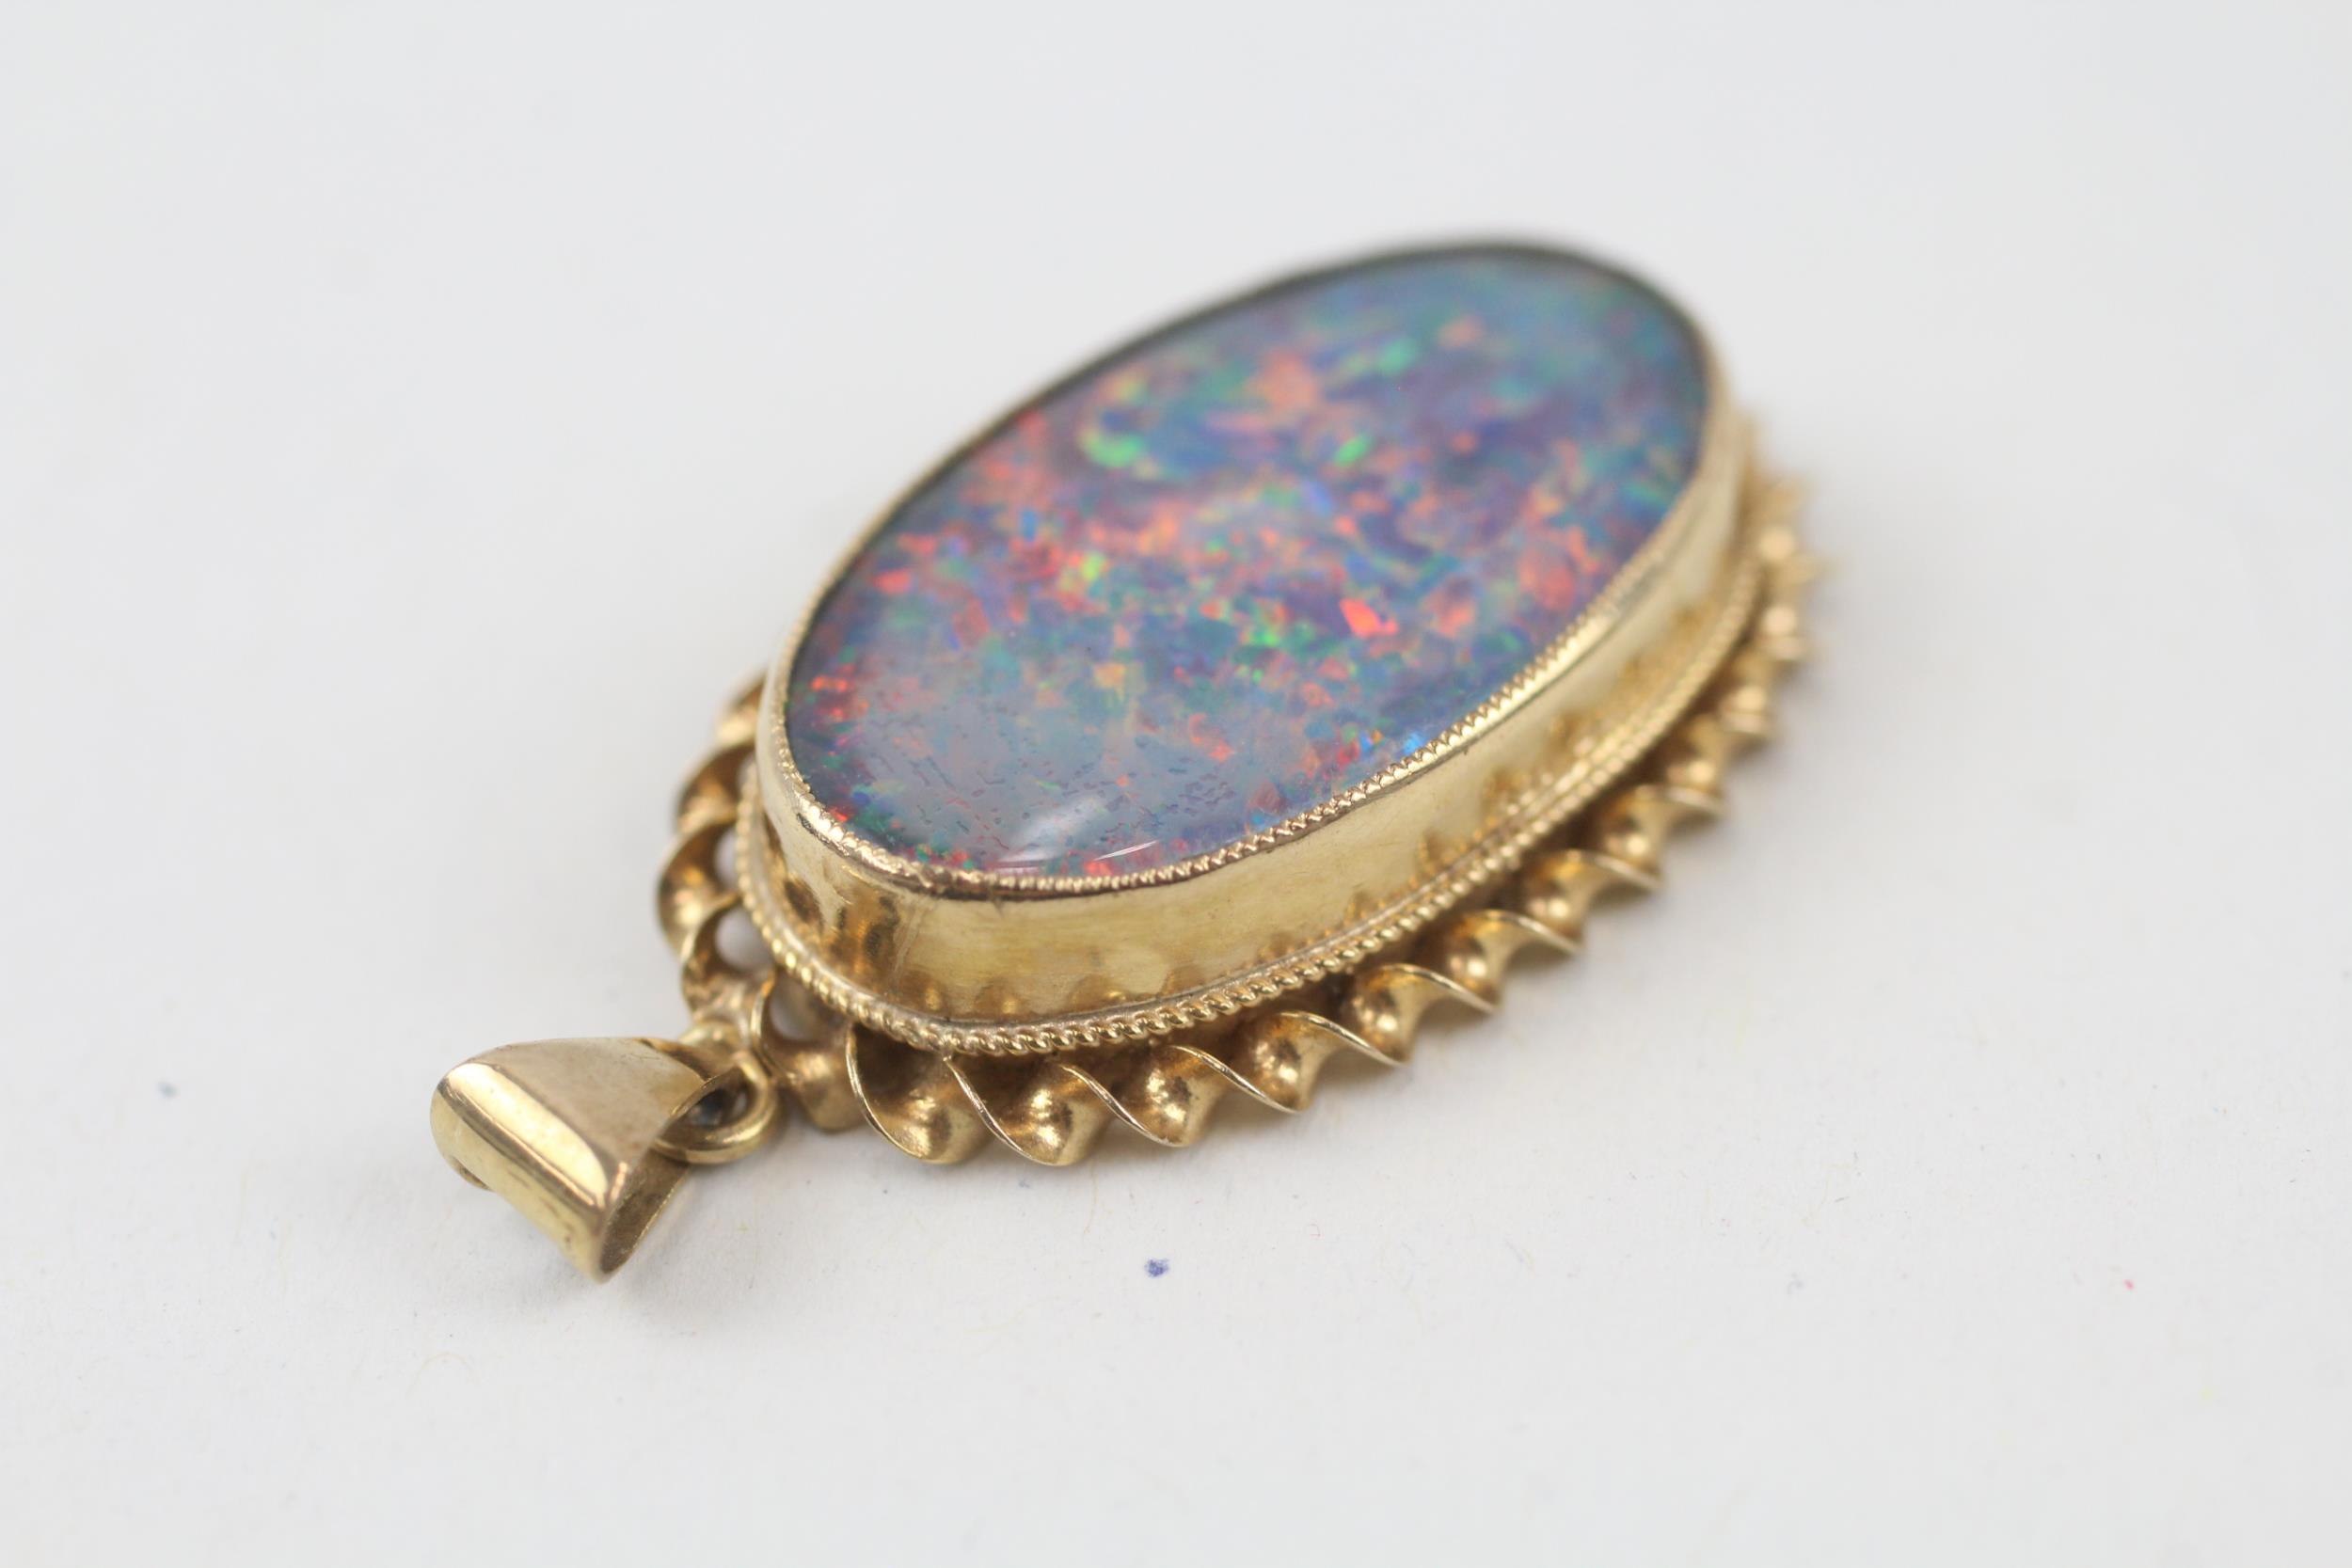 9ct gold oval opal triplet single stone pendant - 4.6 g - Image 4 of 7